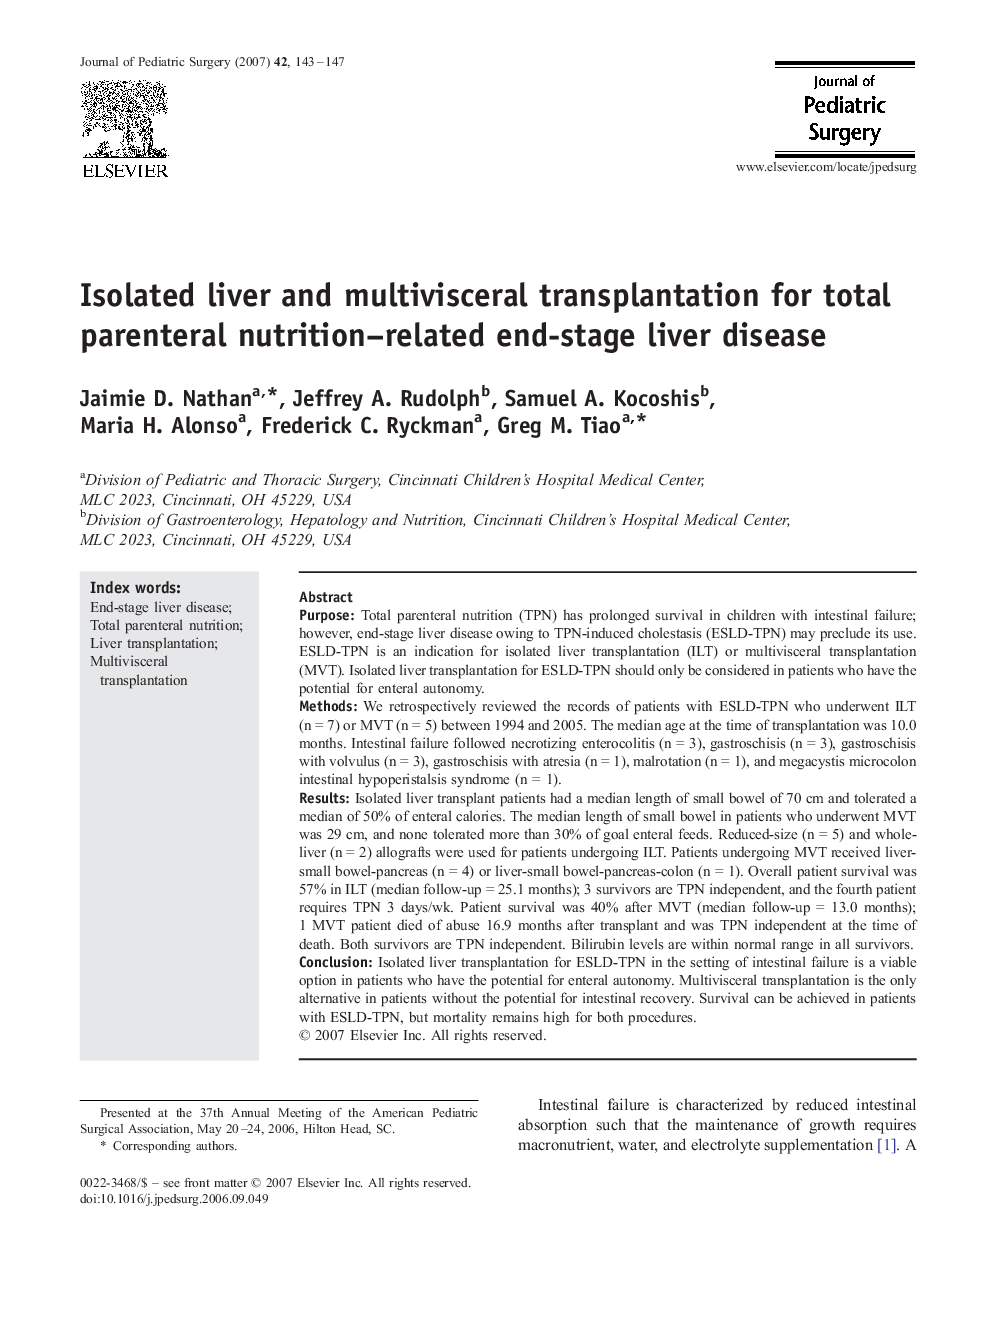 Isolated liver and multivisceral transplantation for total parenteral nutrition–related end-stage liver disease 